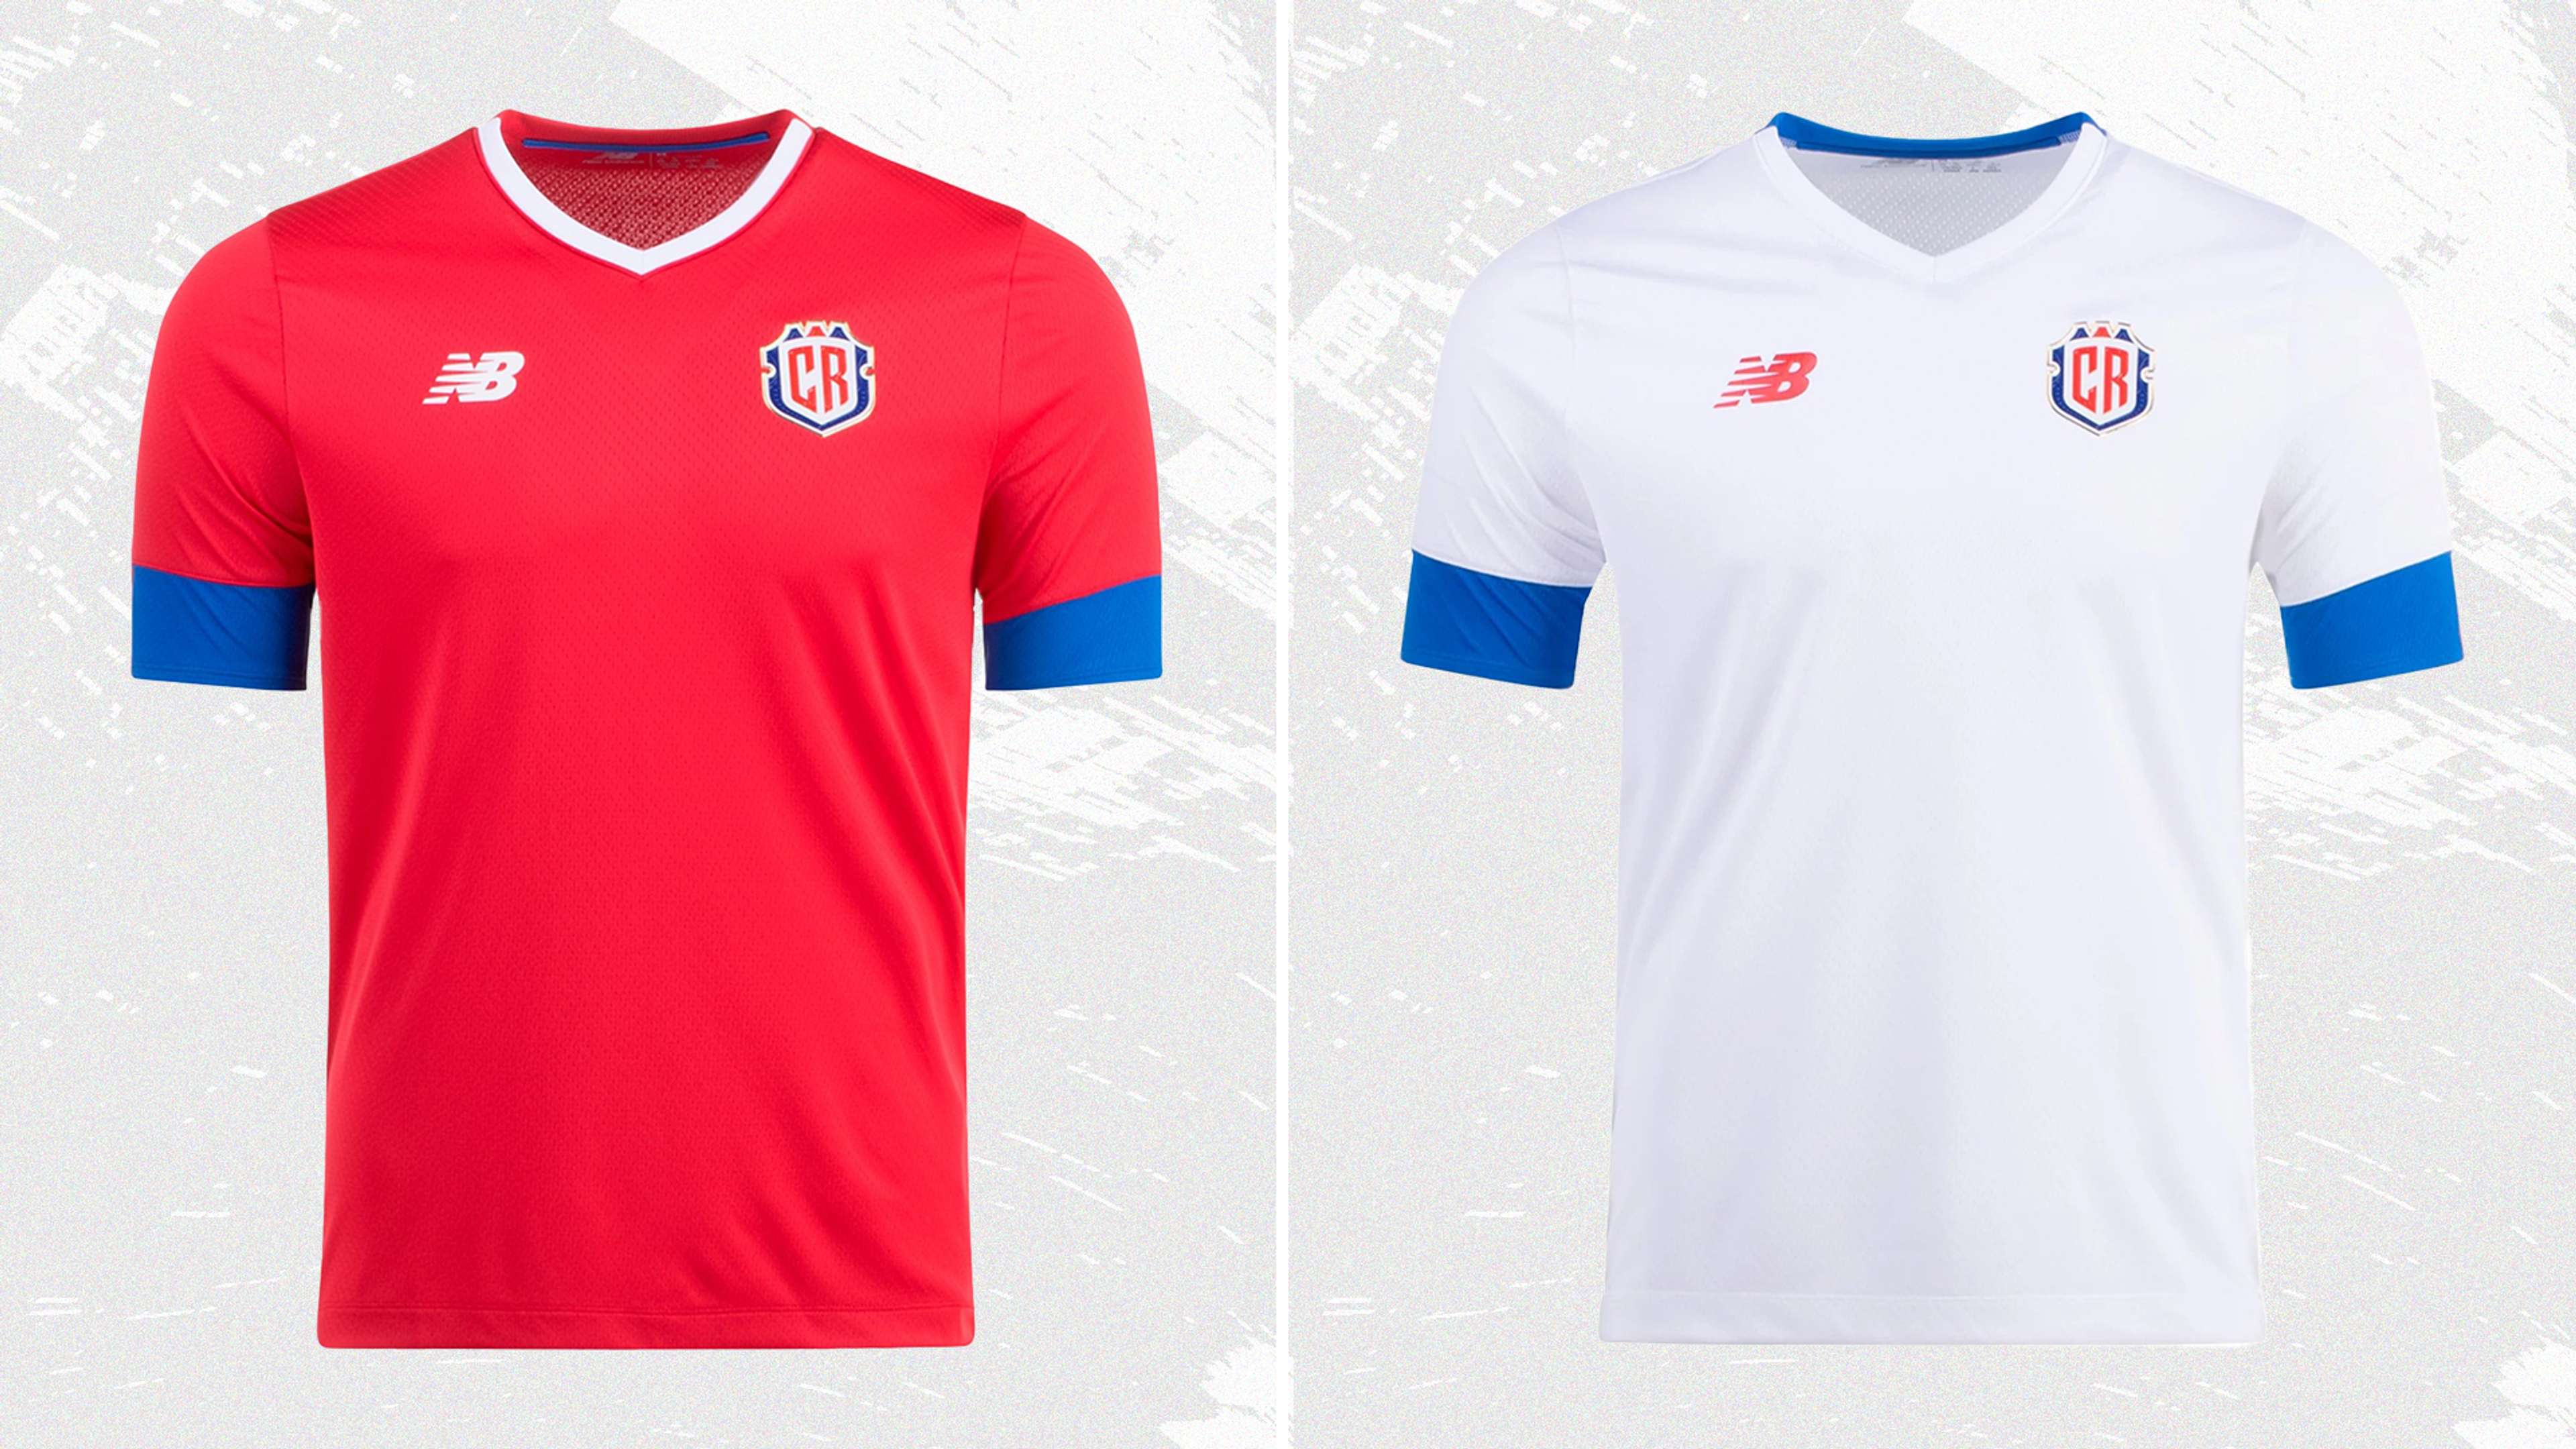 2022 World Cup Kits Ranked - Costa Rica